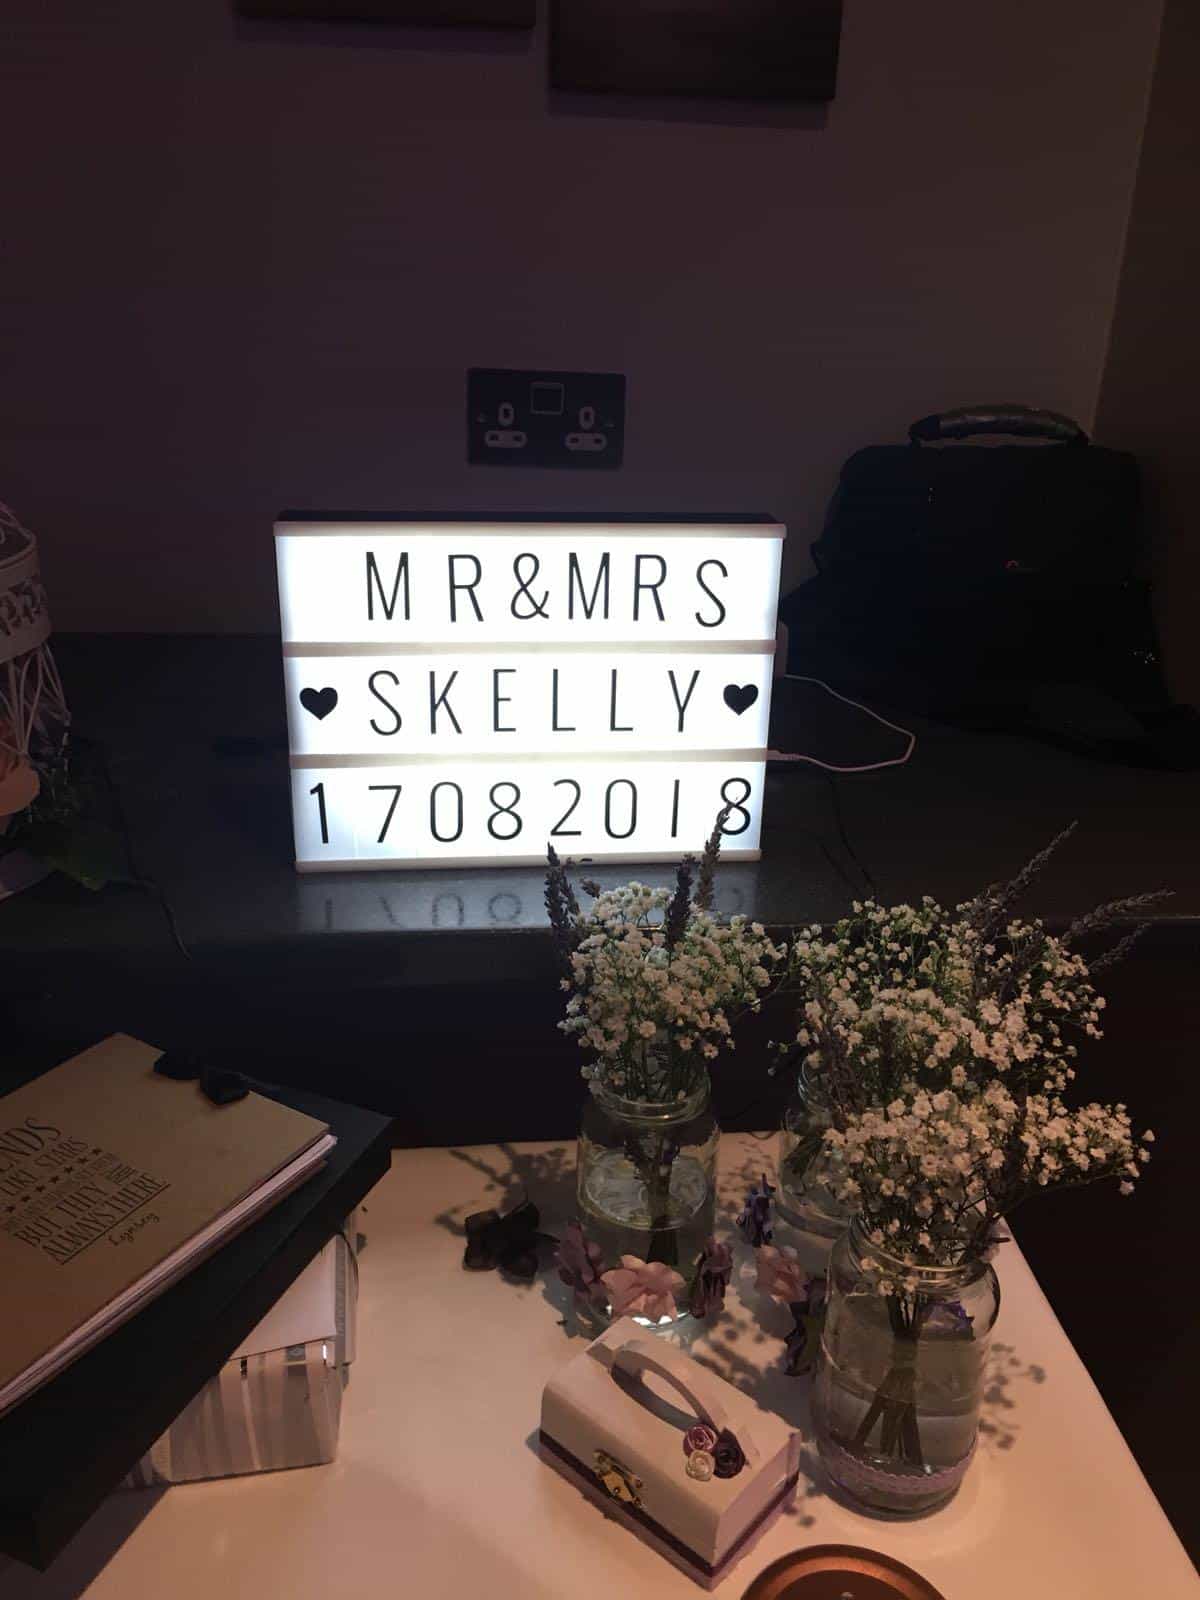 LED letters spelling out 'Mr & Mrs Skelly 17082018' on a table